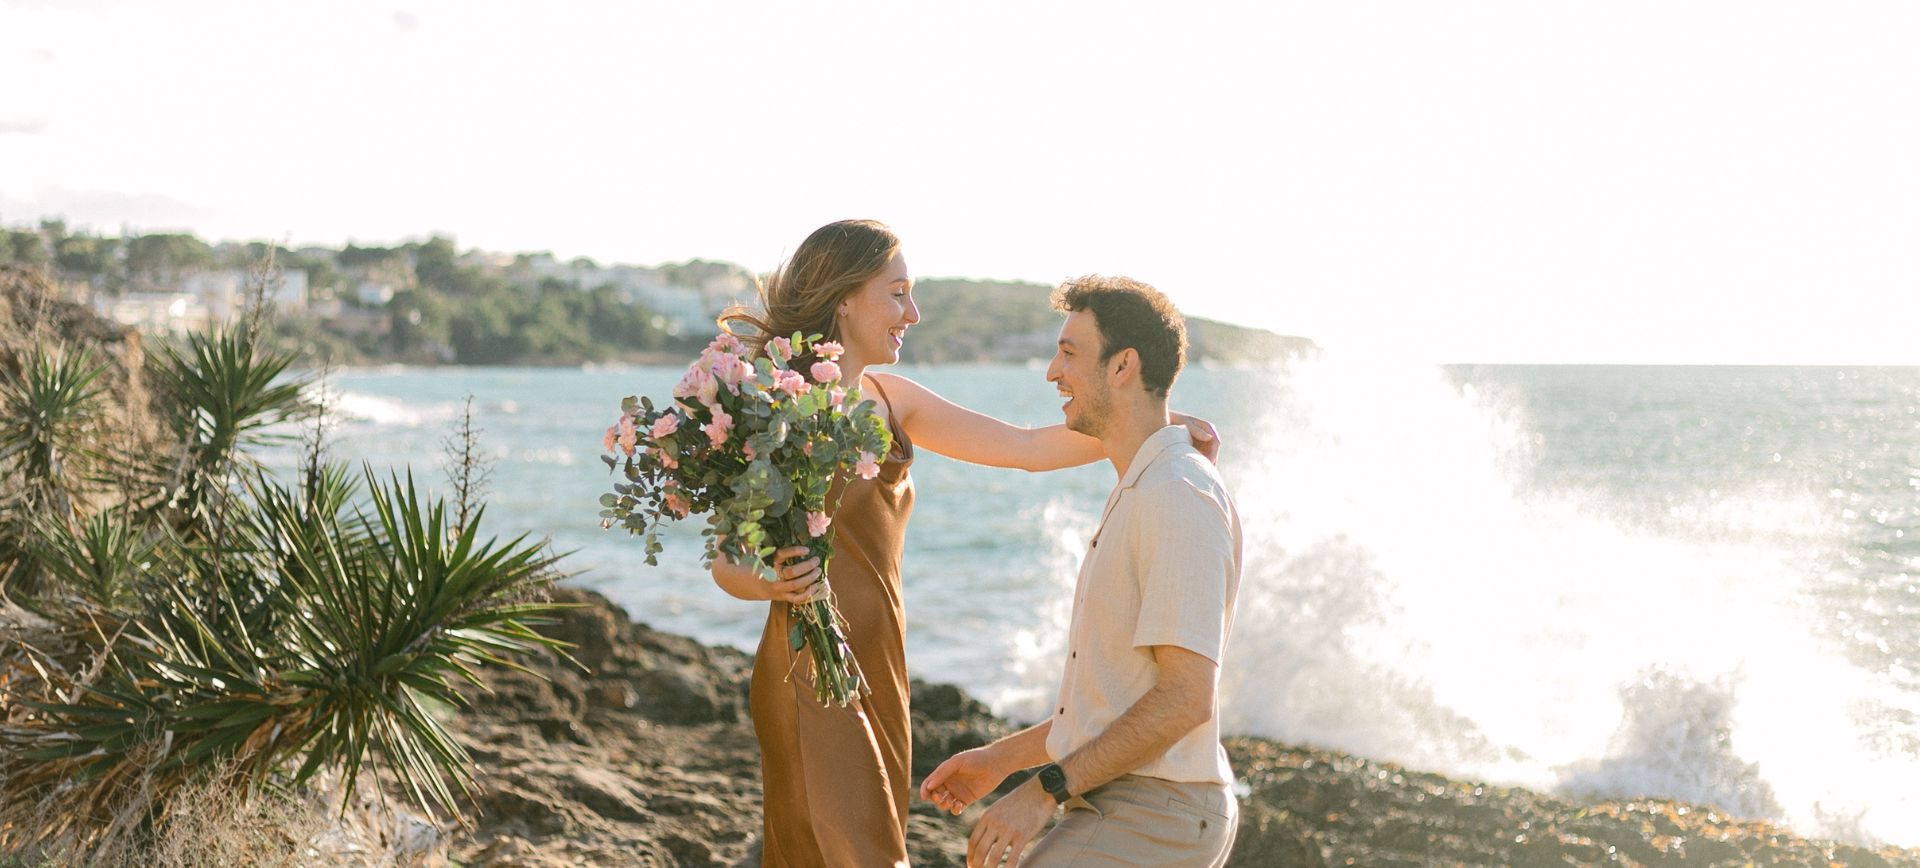 Elope in Mallorca Wedding Package 2